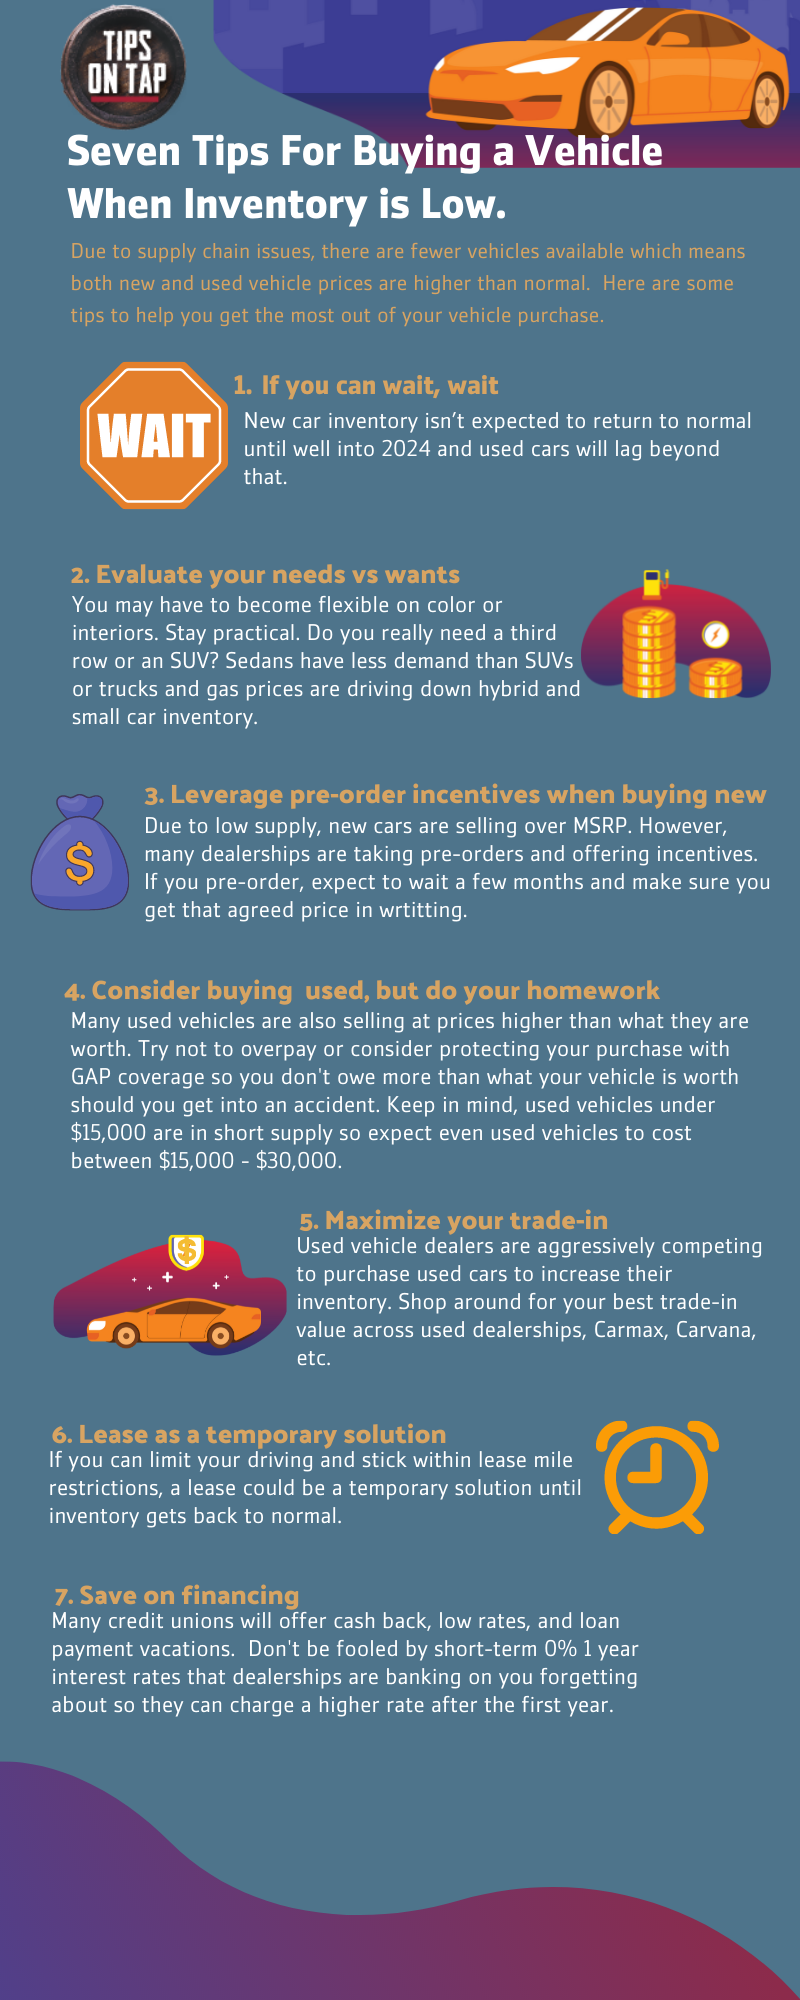 Vehicles buying post COVID Infographic